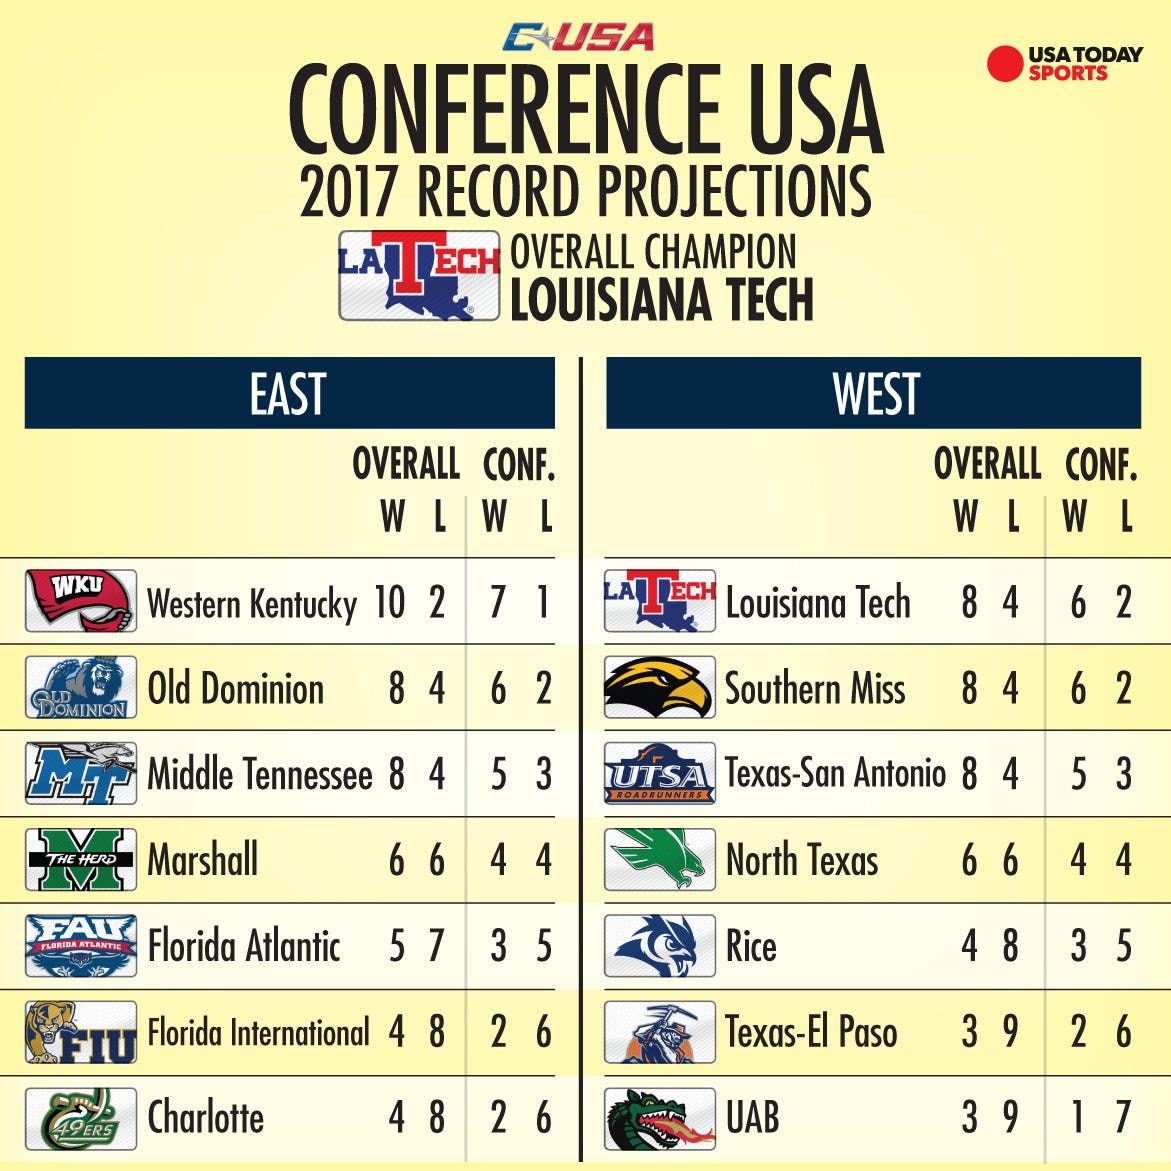 [Image: 636374575485783236-conference-usa-projections-v2.jpg]